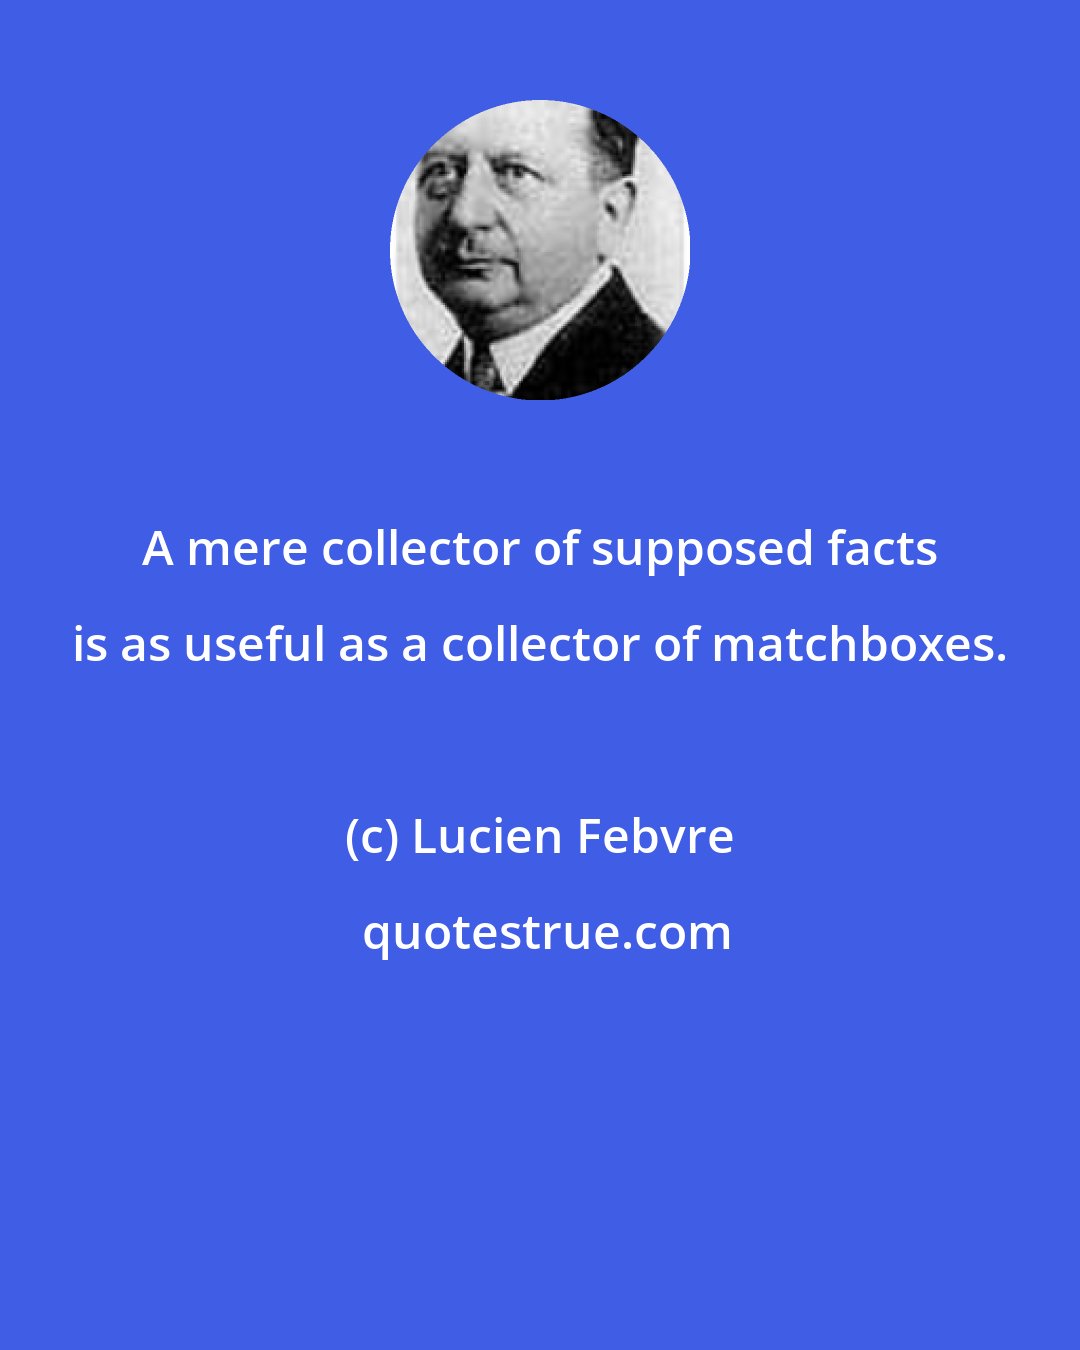 Lucien Febvre: A mere collector of supposed facts is as useful as a collector of matchboxes.